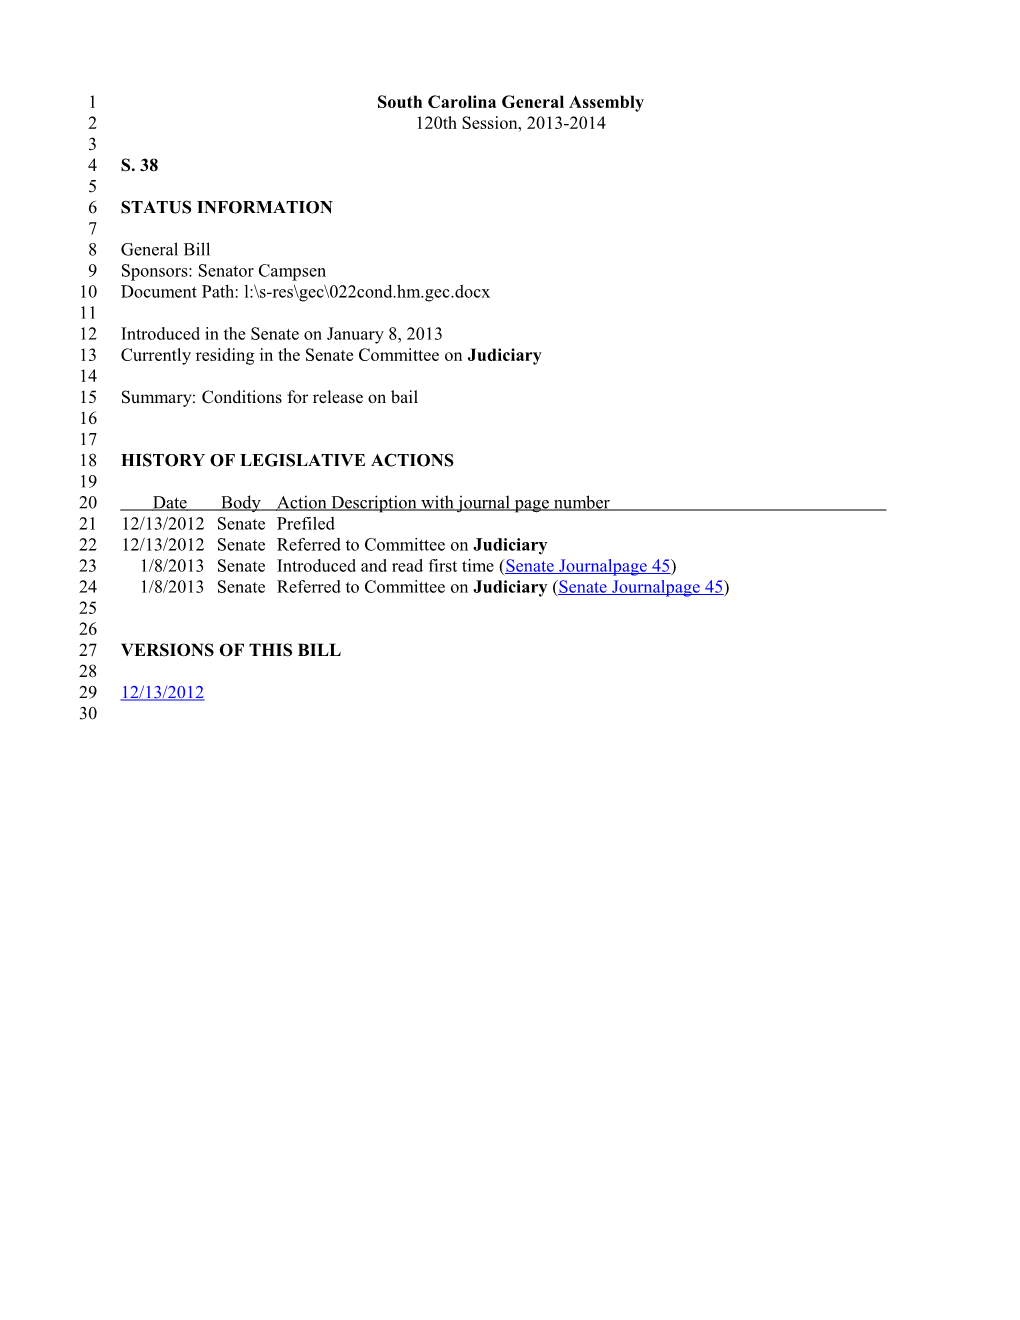 2013-2014 Bill 38: Conditions for Release on Bail - South Carolina Legislature Online